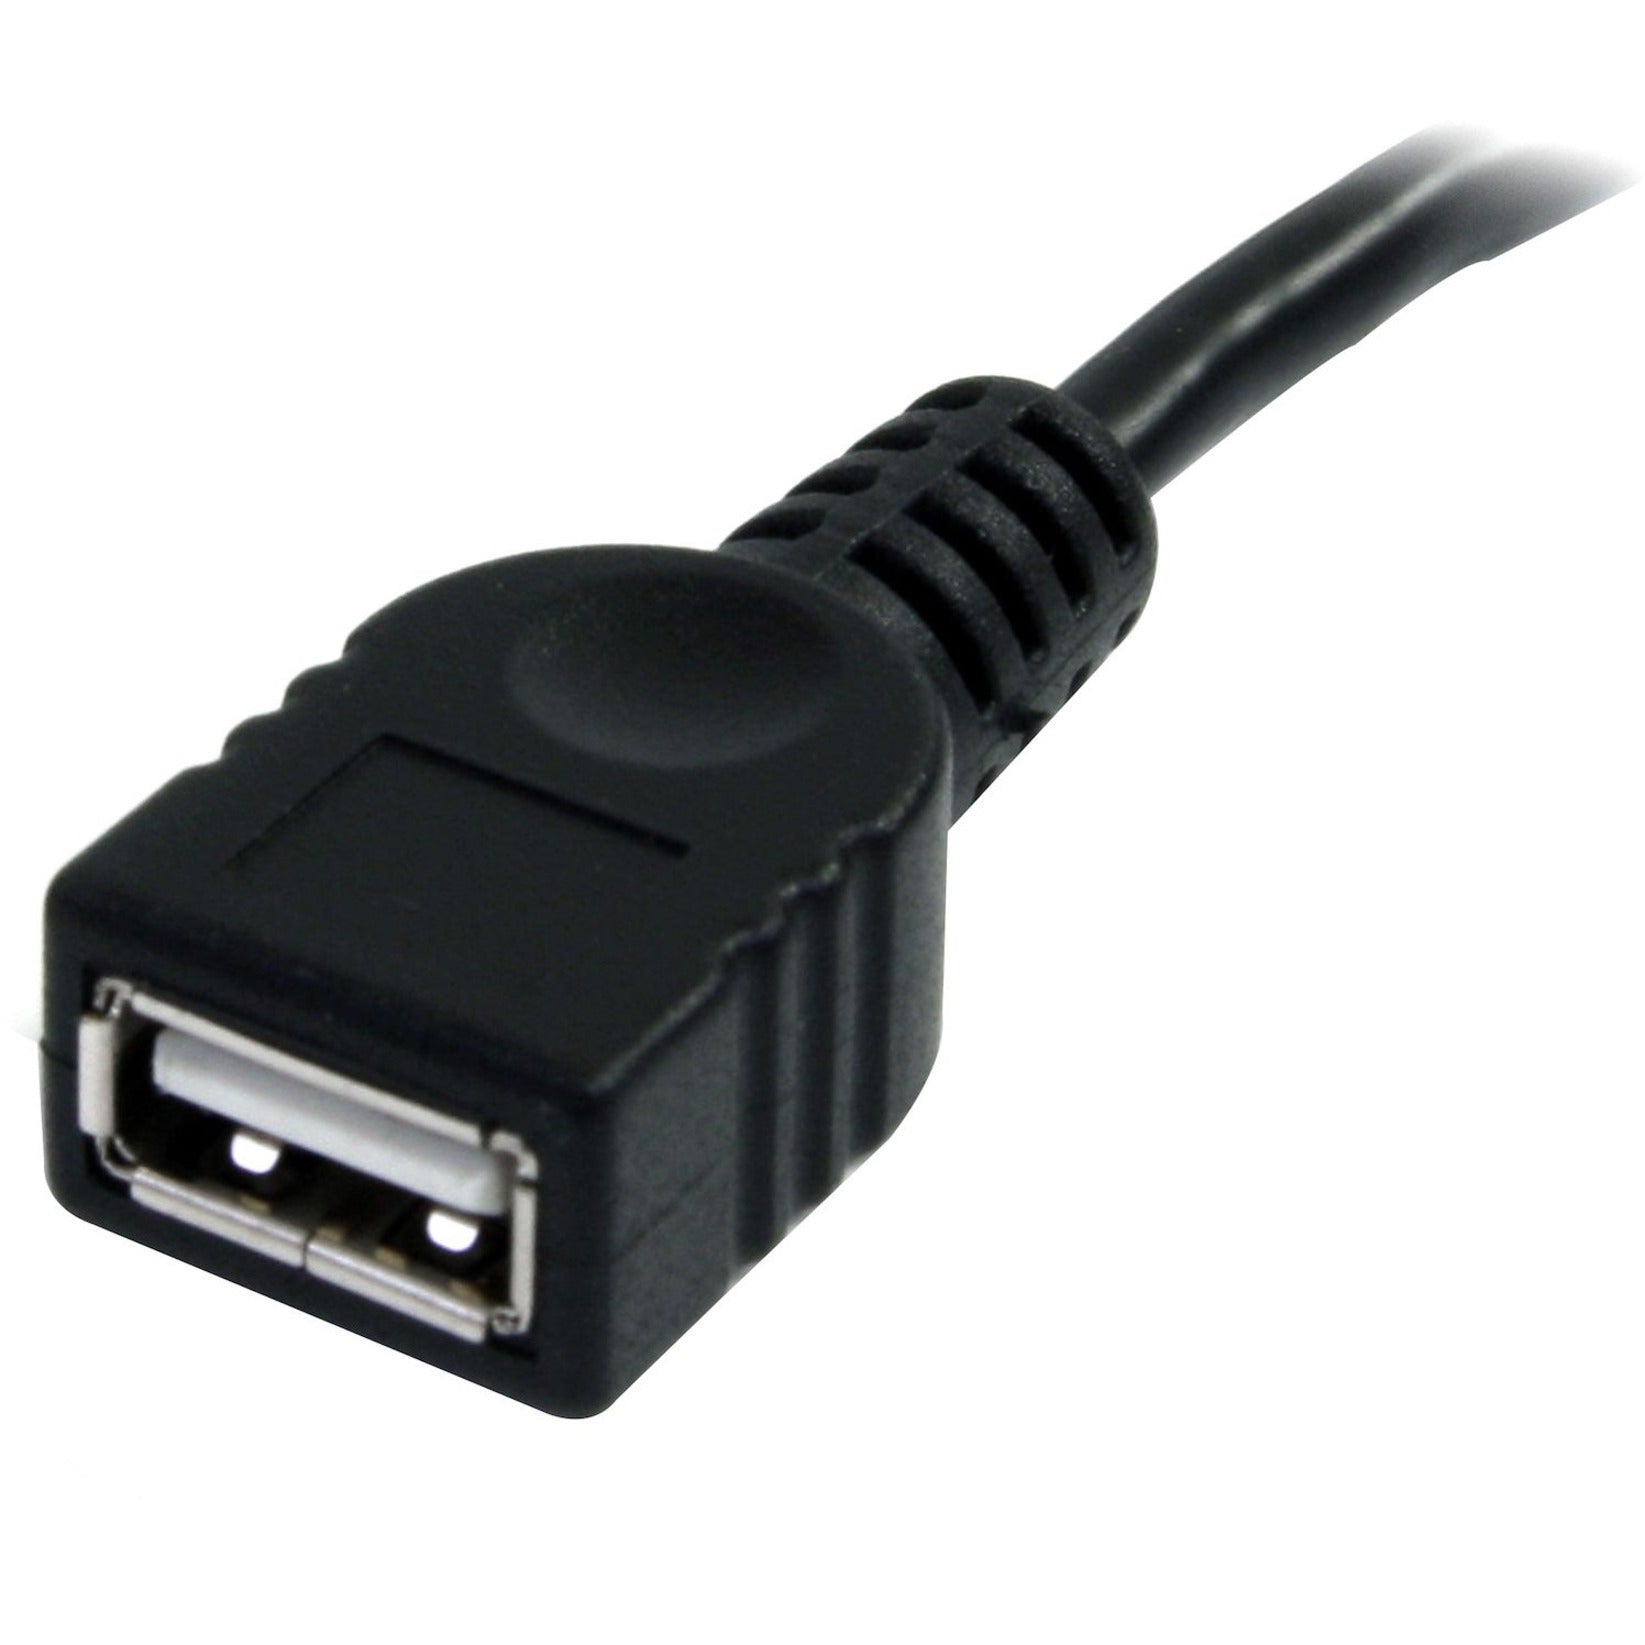 StarTech.com USBEXTAA10BK 10 ft Black USB 2.0 Extension Cable A to A - M/F, Molded, Flexible, Strain Relief, 480 Mbit/s Data Transfer Rate